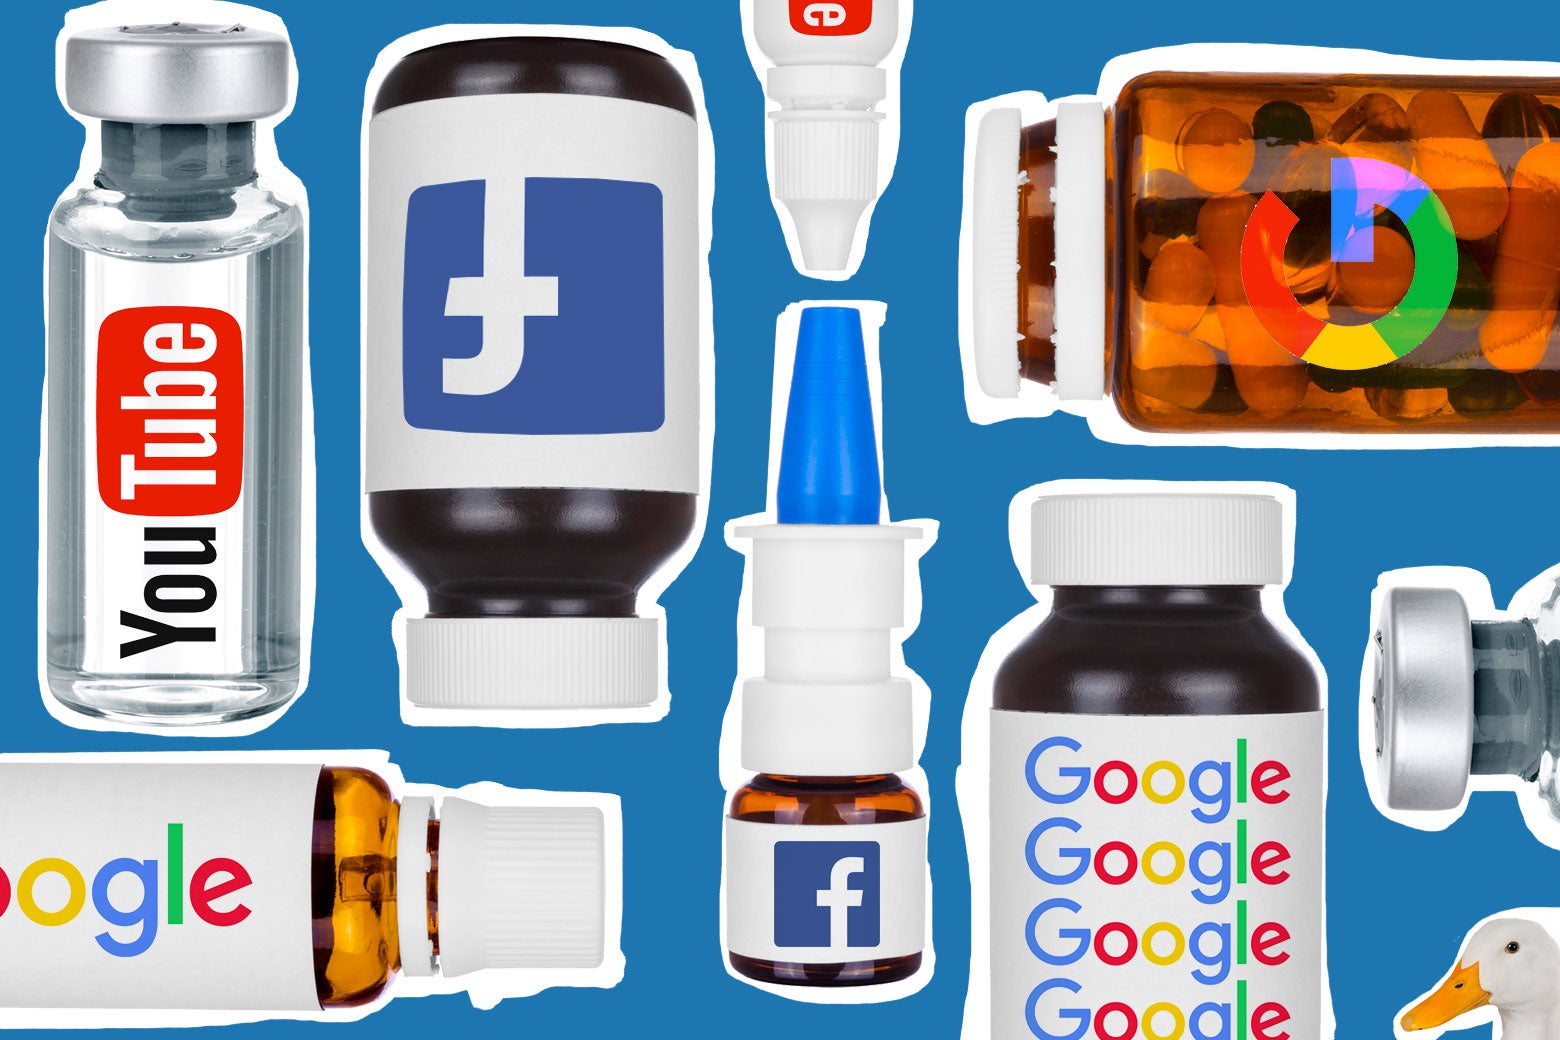 Logos for Facebook, Google, and Youtube on various medicine bottles, along with a duck.